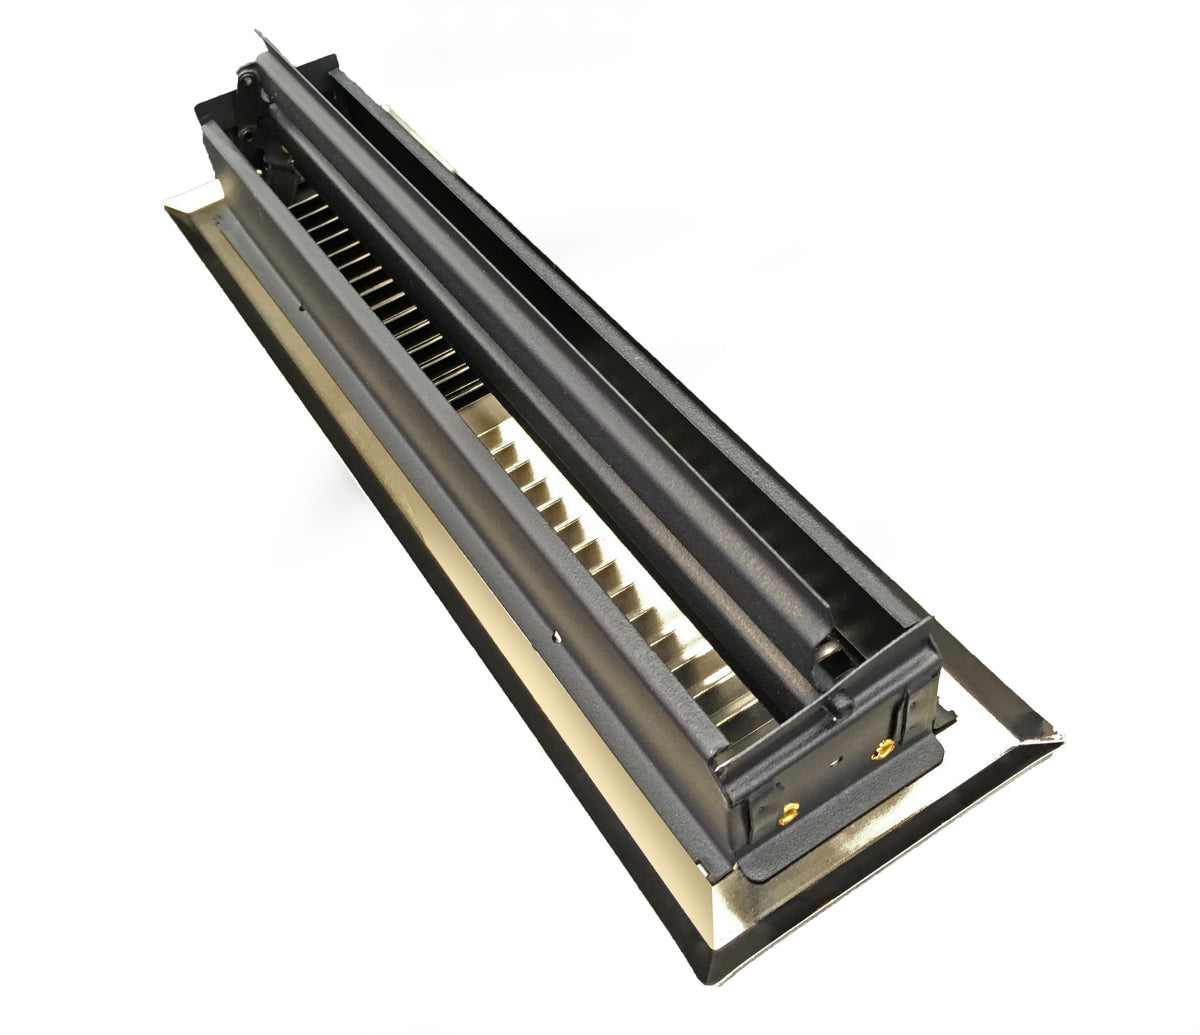 4&quot; X 14&quot; Modern Floor Register Grille With Dampers - Contempo Slotted Grate - HVAC Vent Duct Cover - Polished Brass